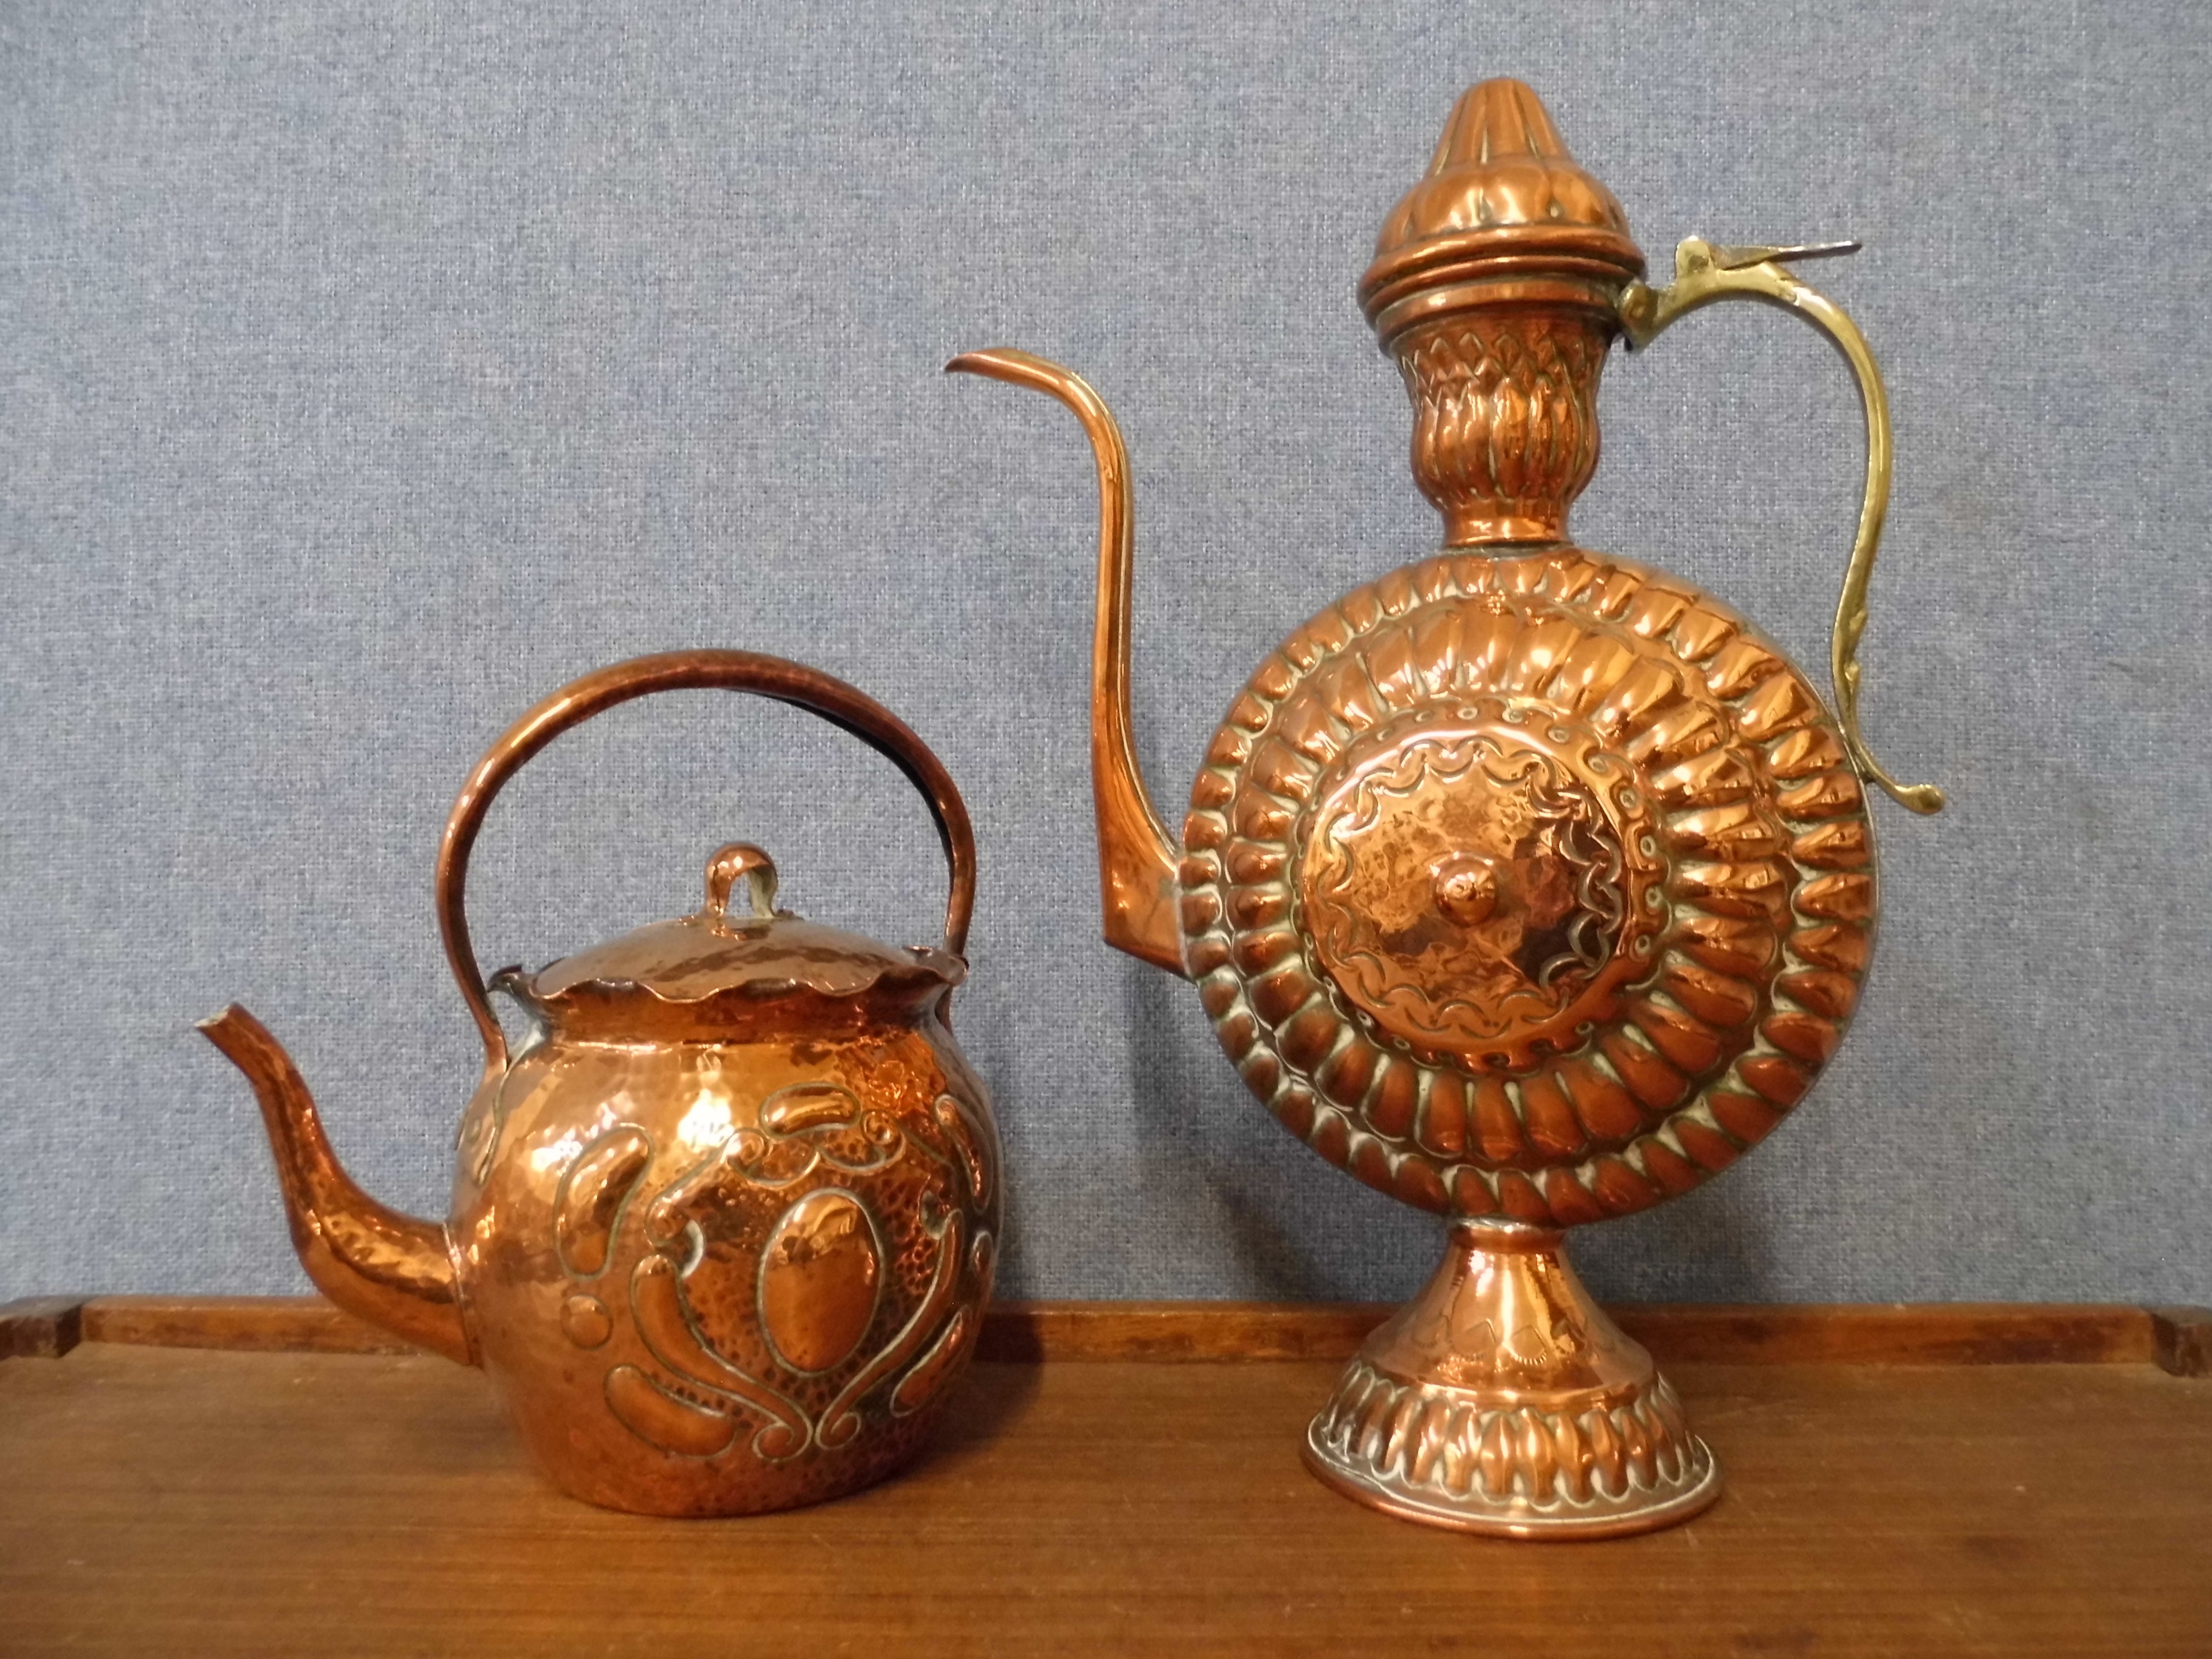 An Arts and Crafts Newlyn style copper kettle and a continental copper ewer